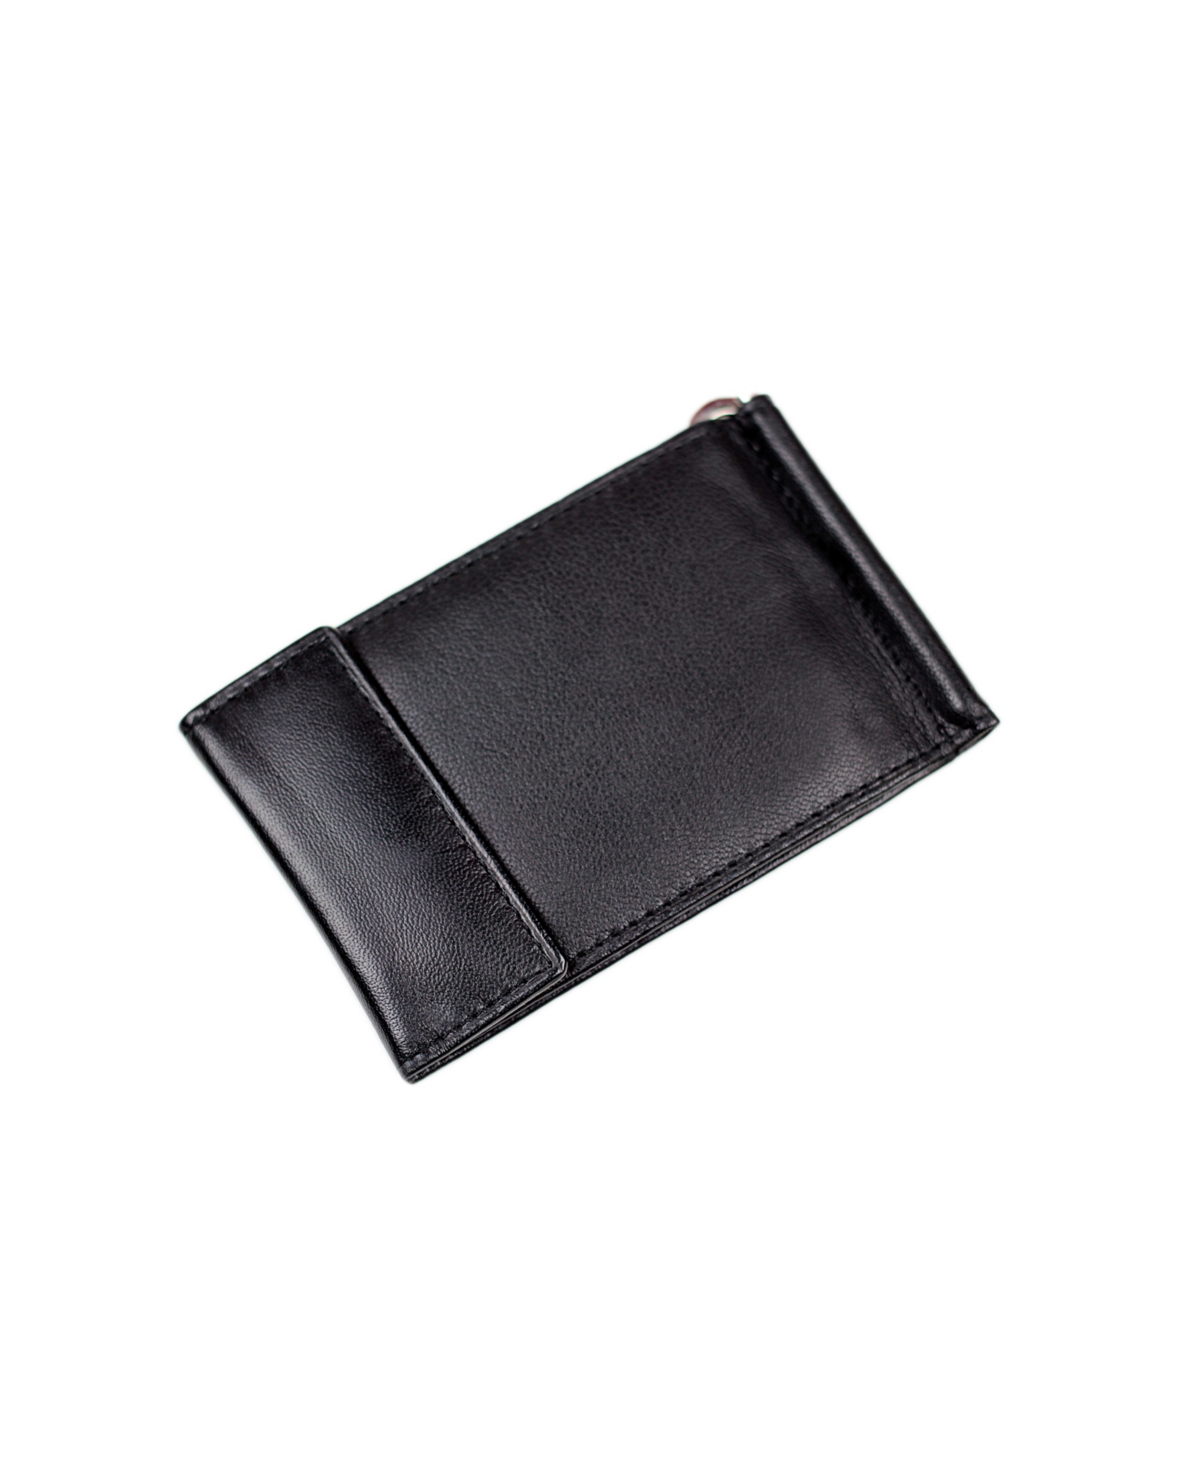 Men's Champs Genuine Leather Bill Fold Money Clip with Snap Closure - Black